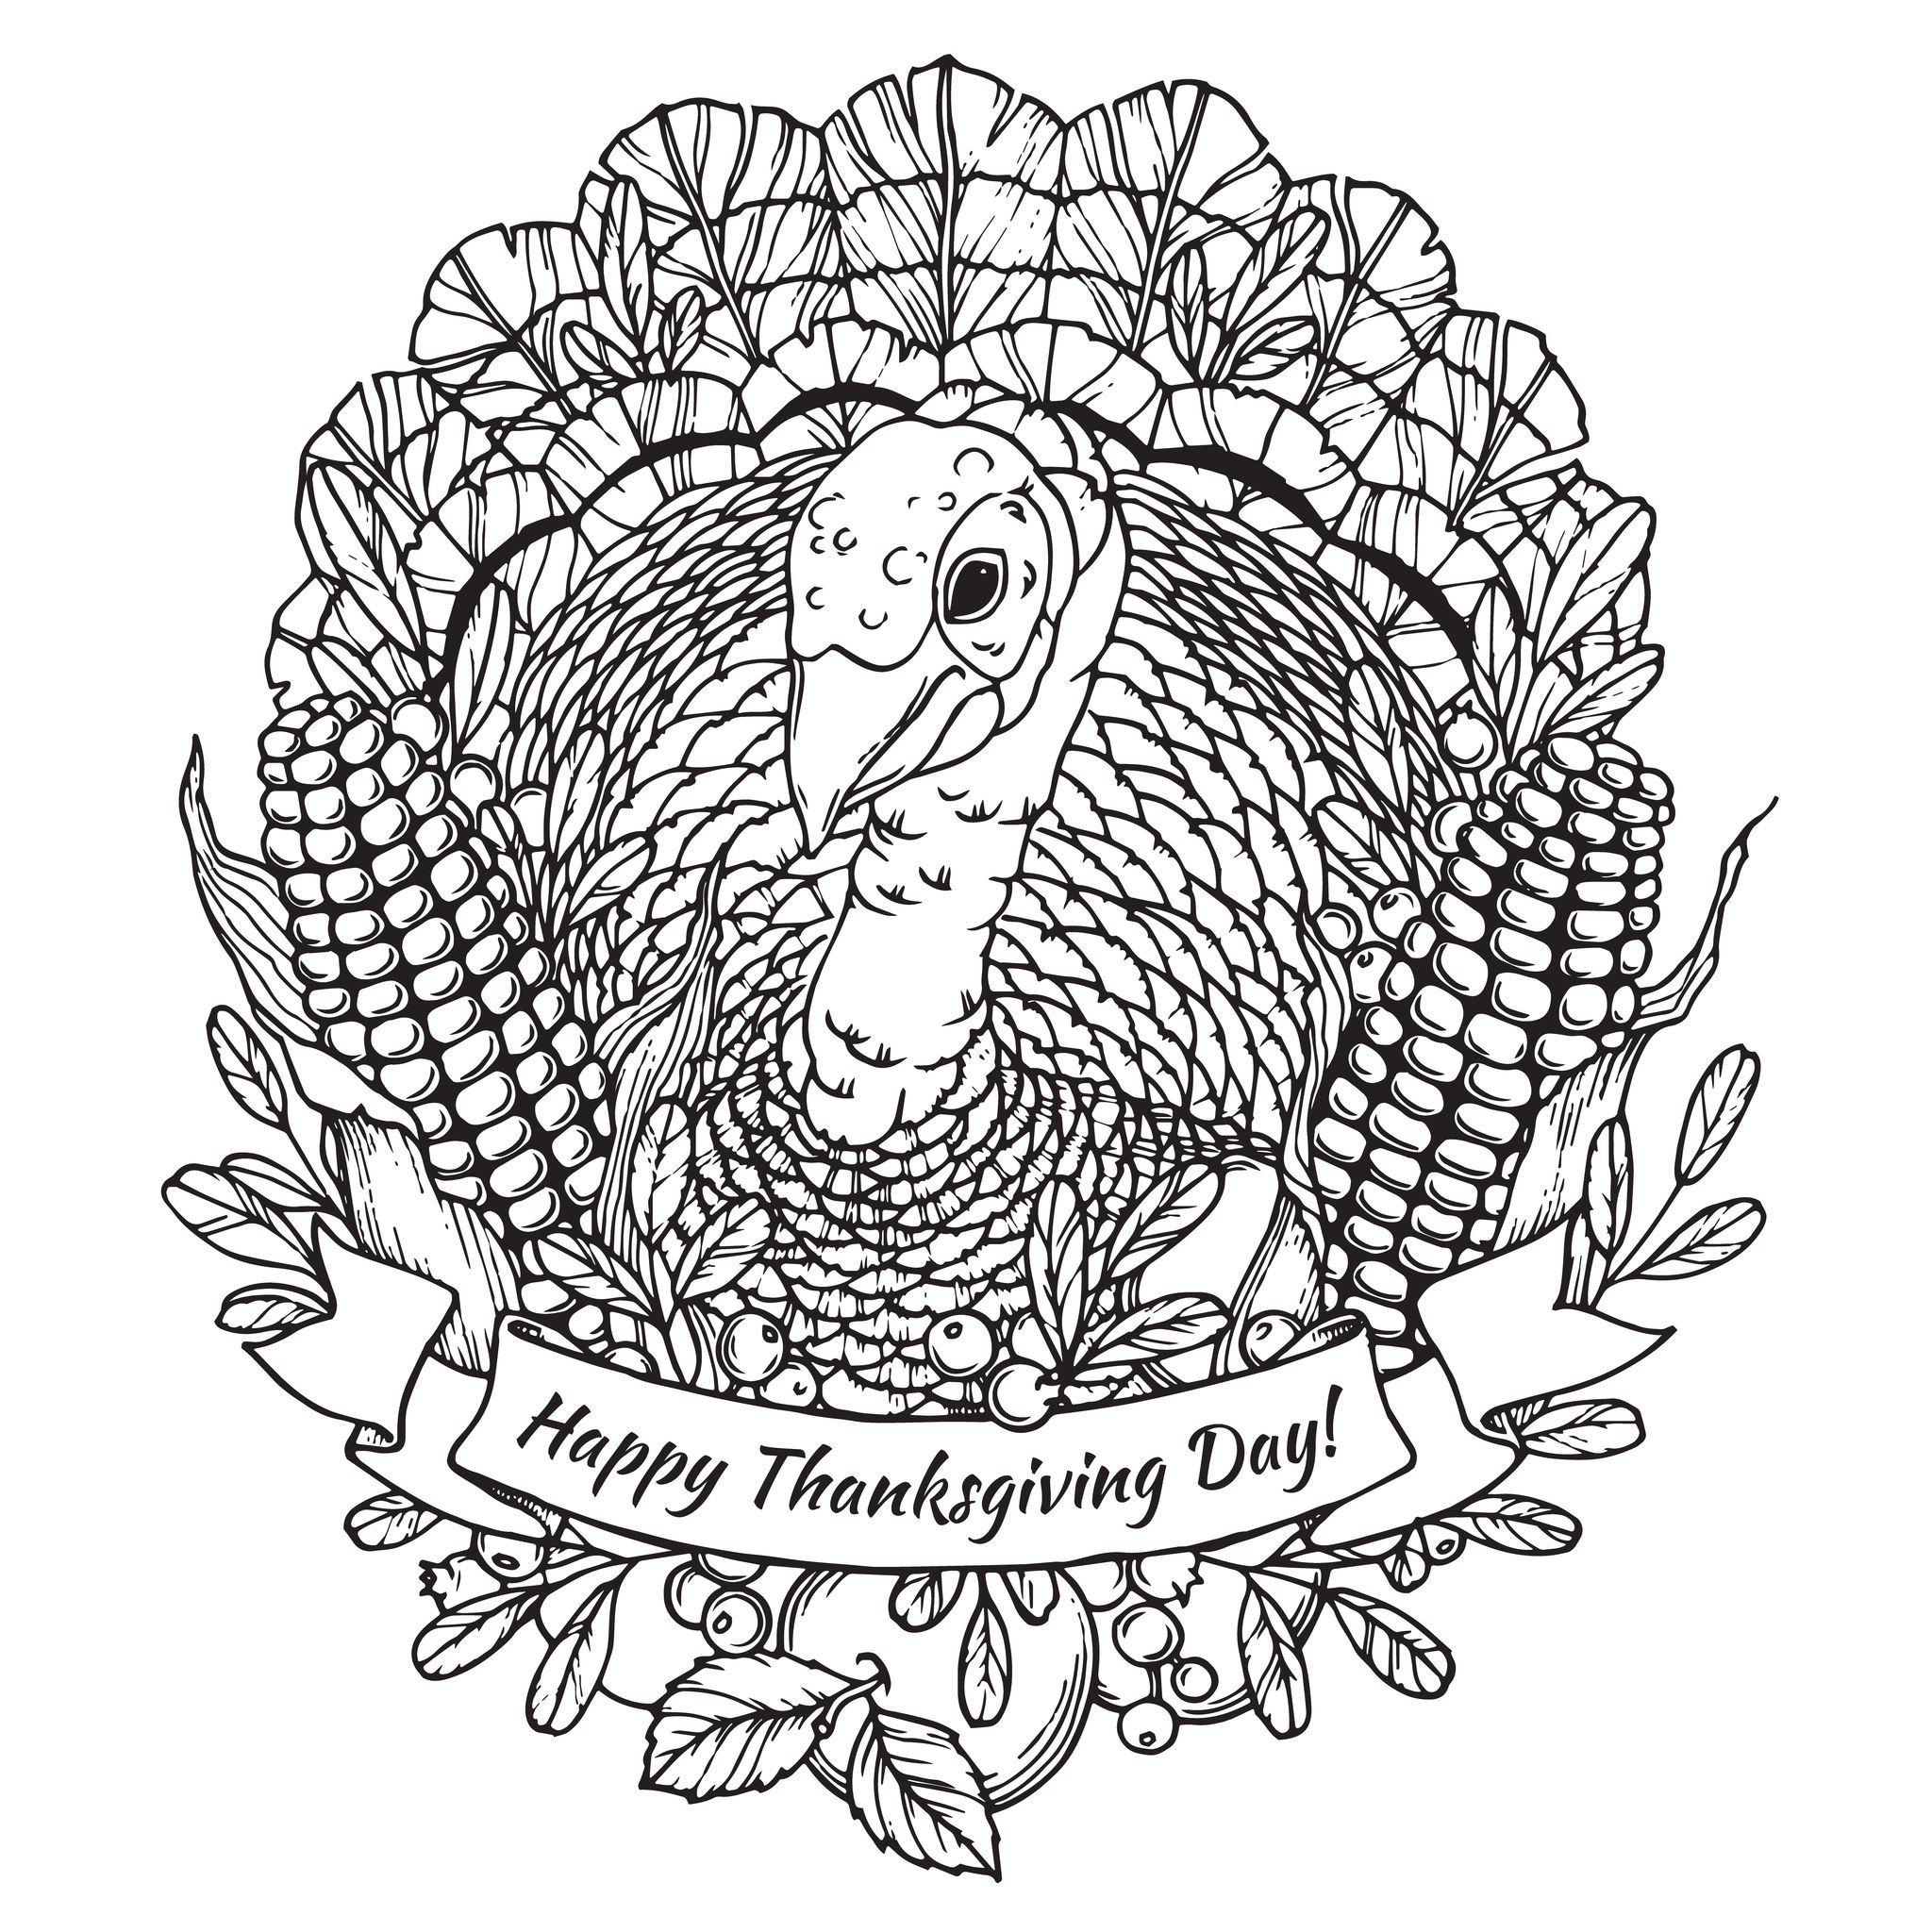 Thanksgiving day coloring page with turkey ve ables corn and fruits